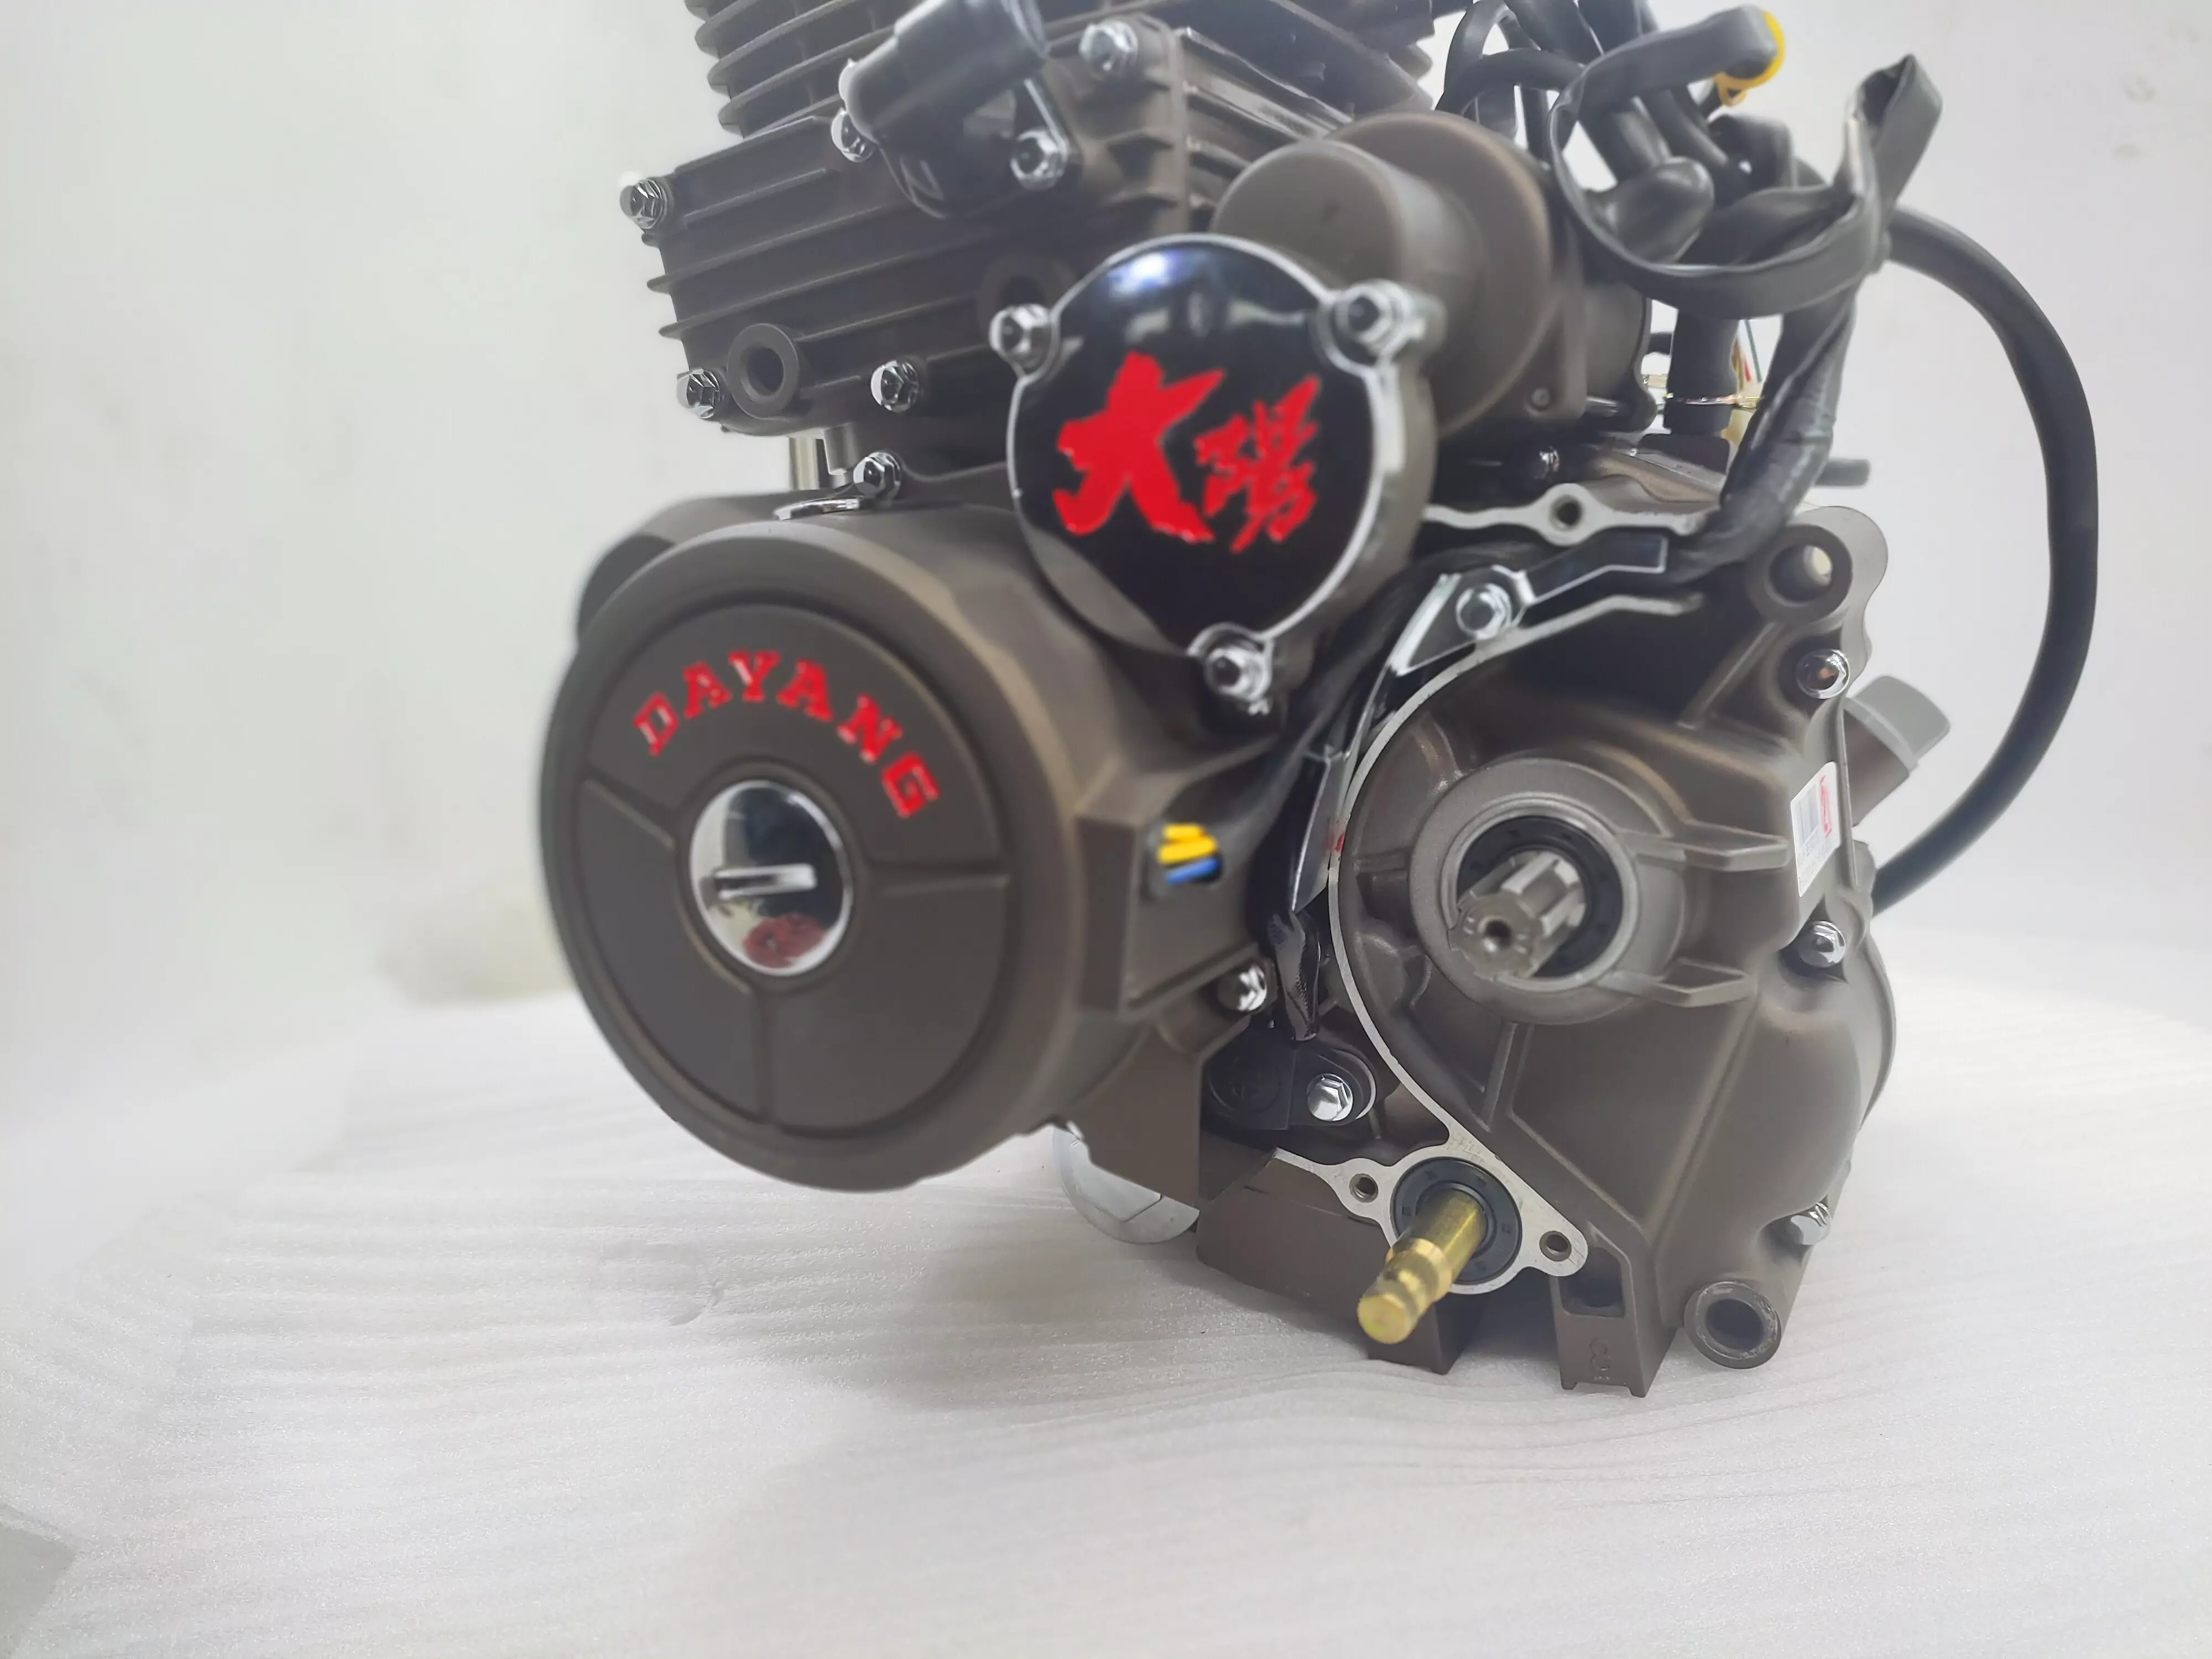 CG175cc Cool with the  pump DAYANG LIFAN Motorcycle Engine Assembly Single Cylinder Four Stroke Style China CCC Origin Type